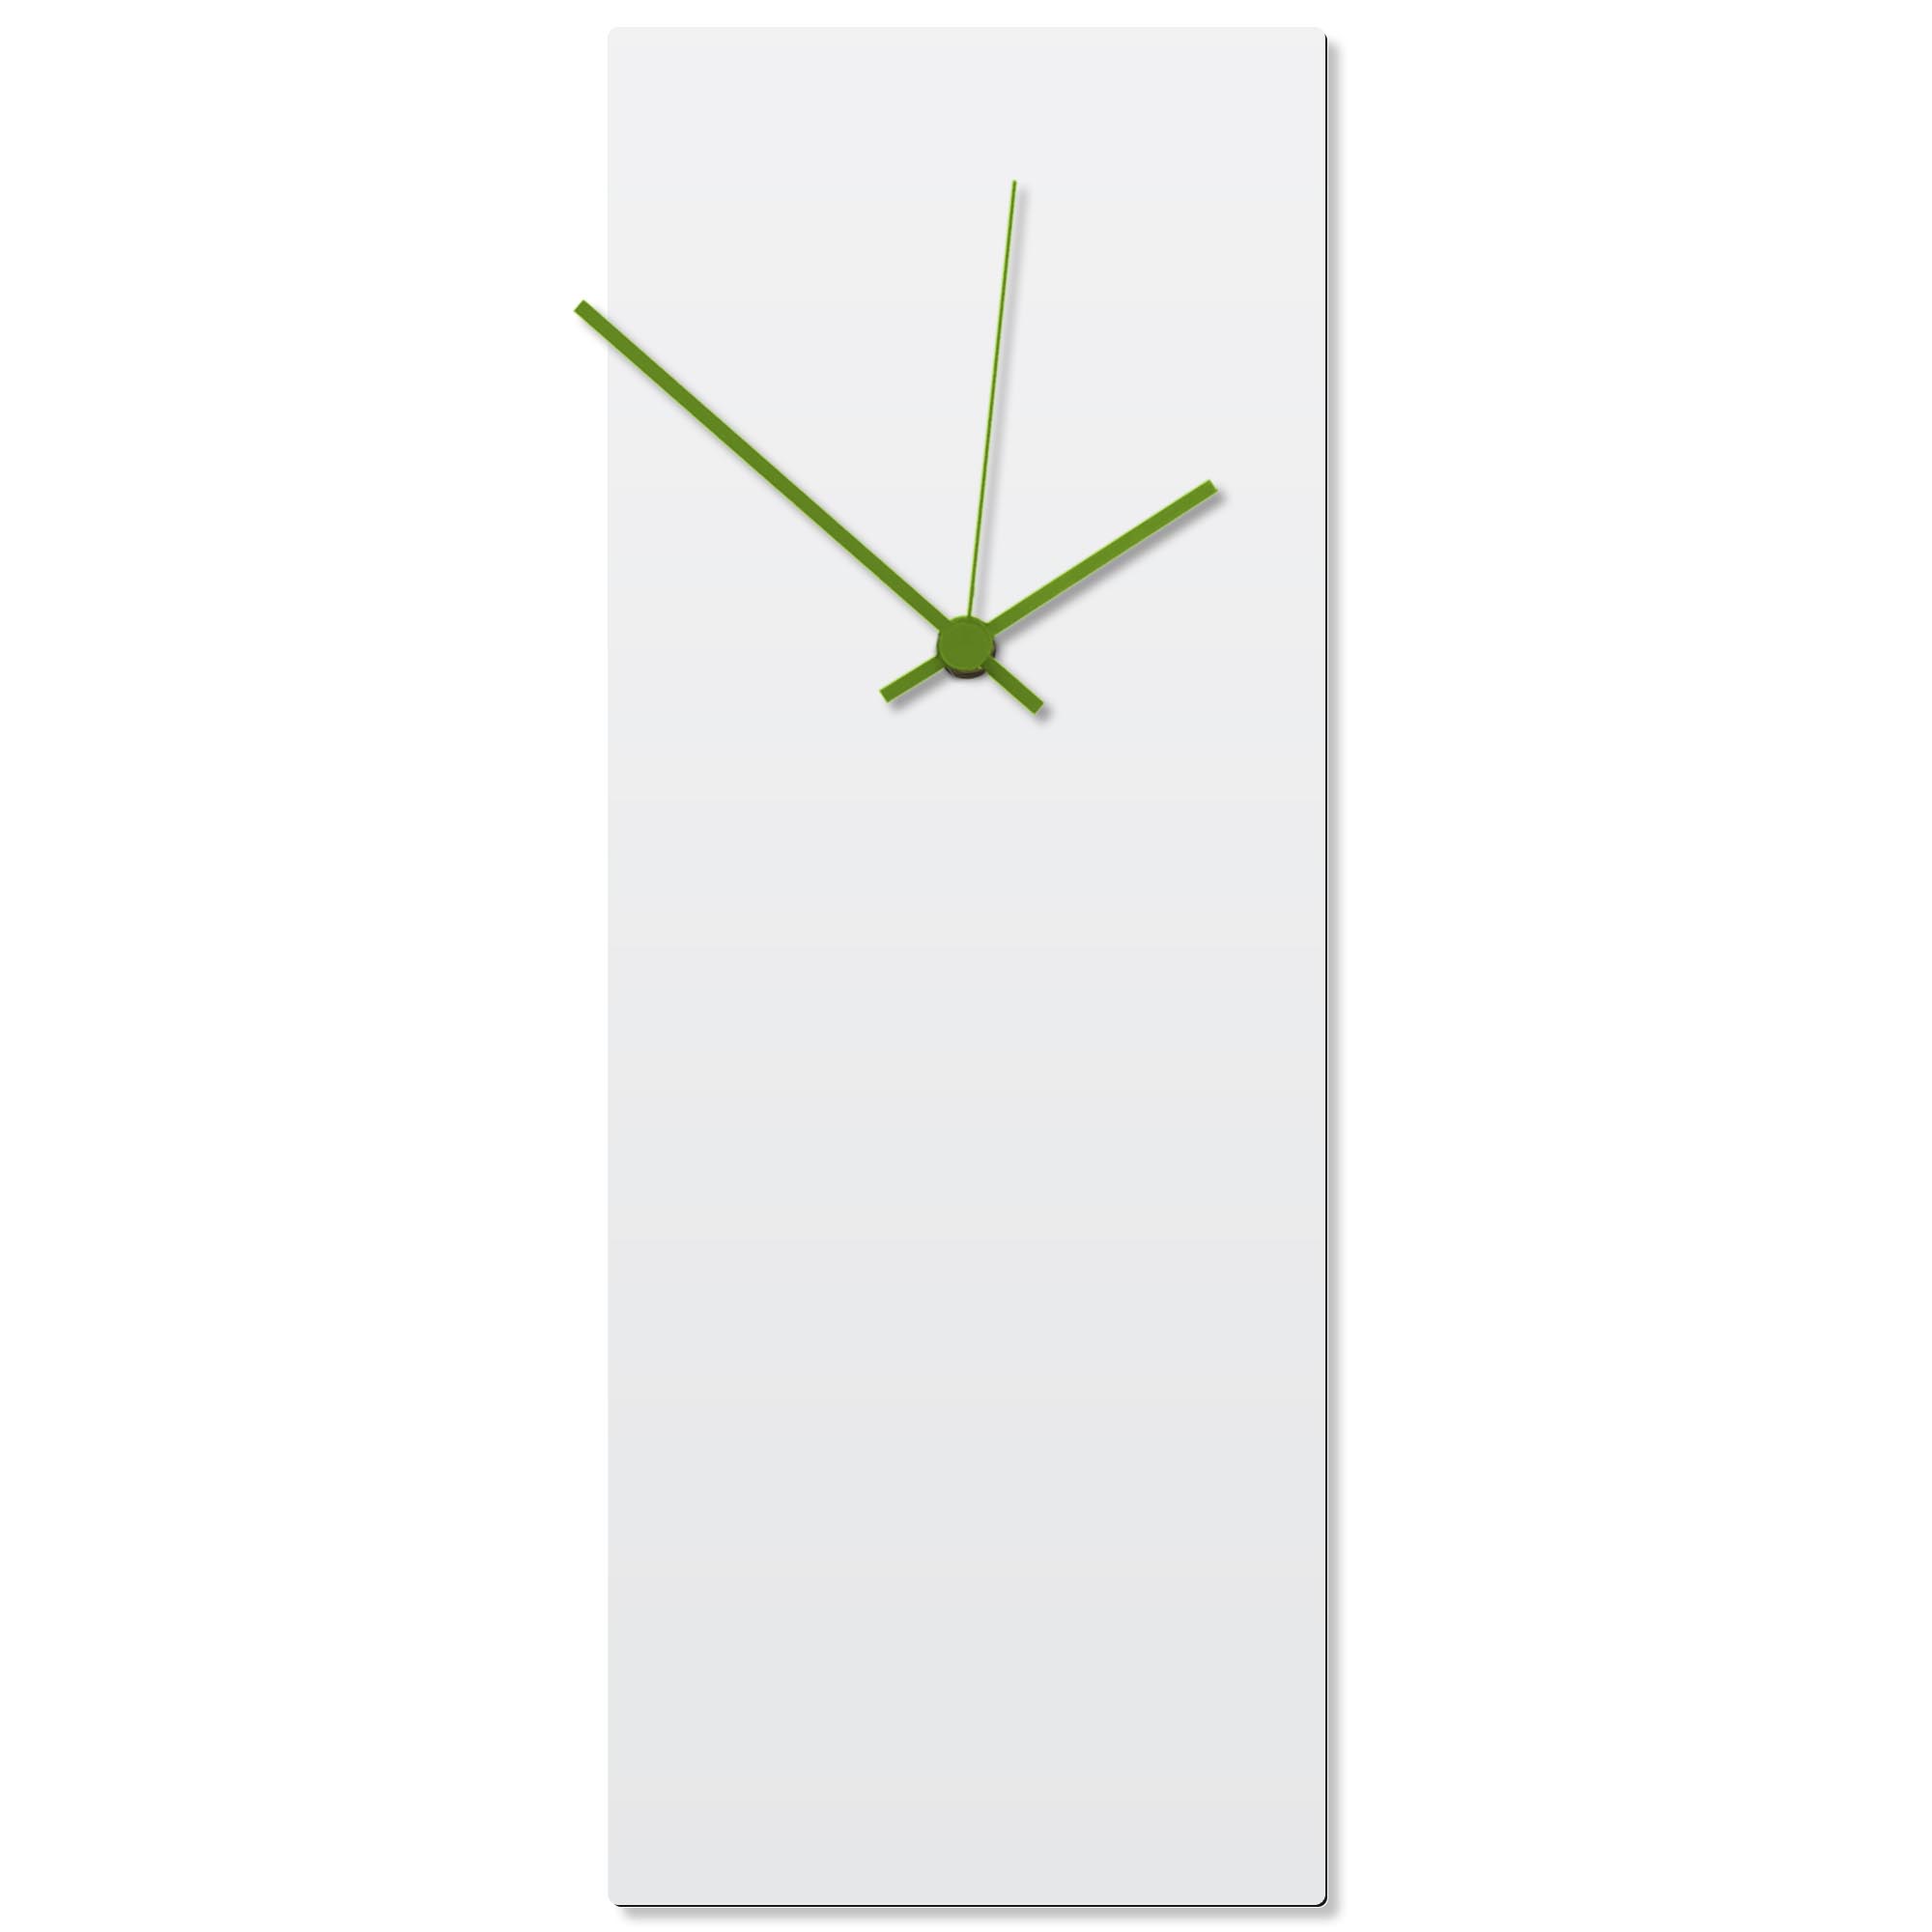 Whiteout Green Clock Large 8.25x22in. Aluminum Polymetal